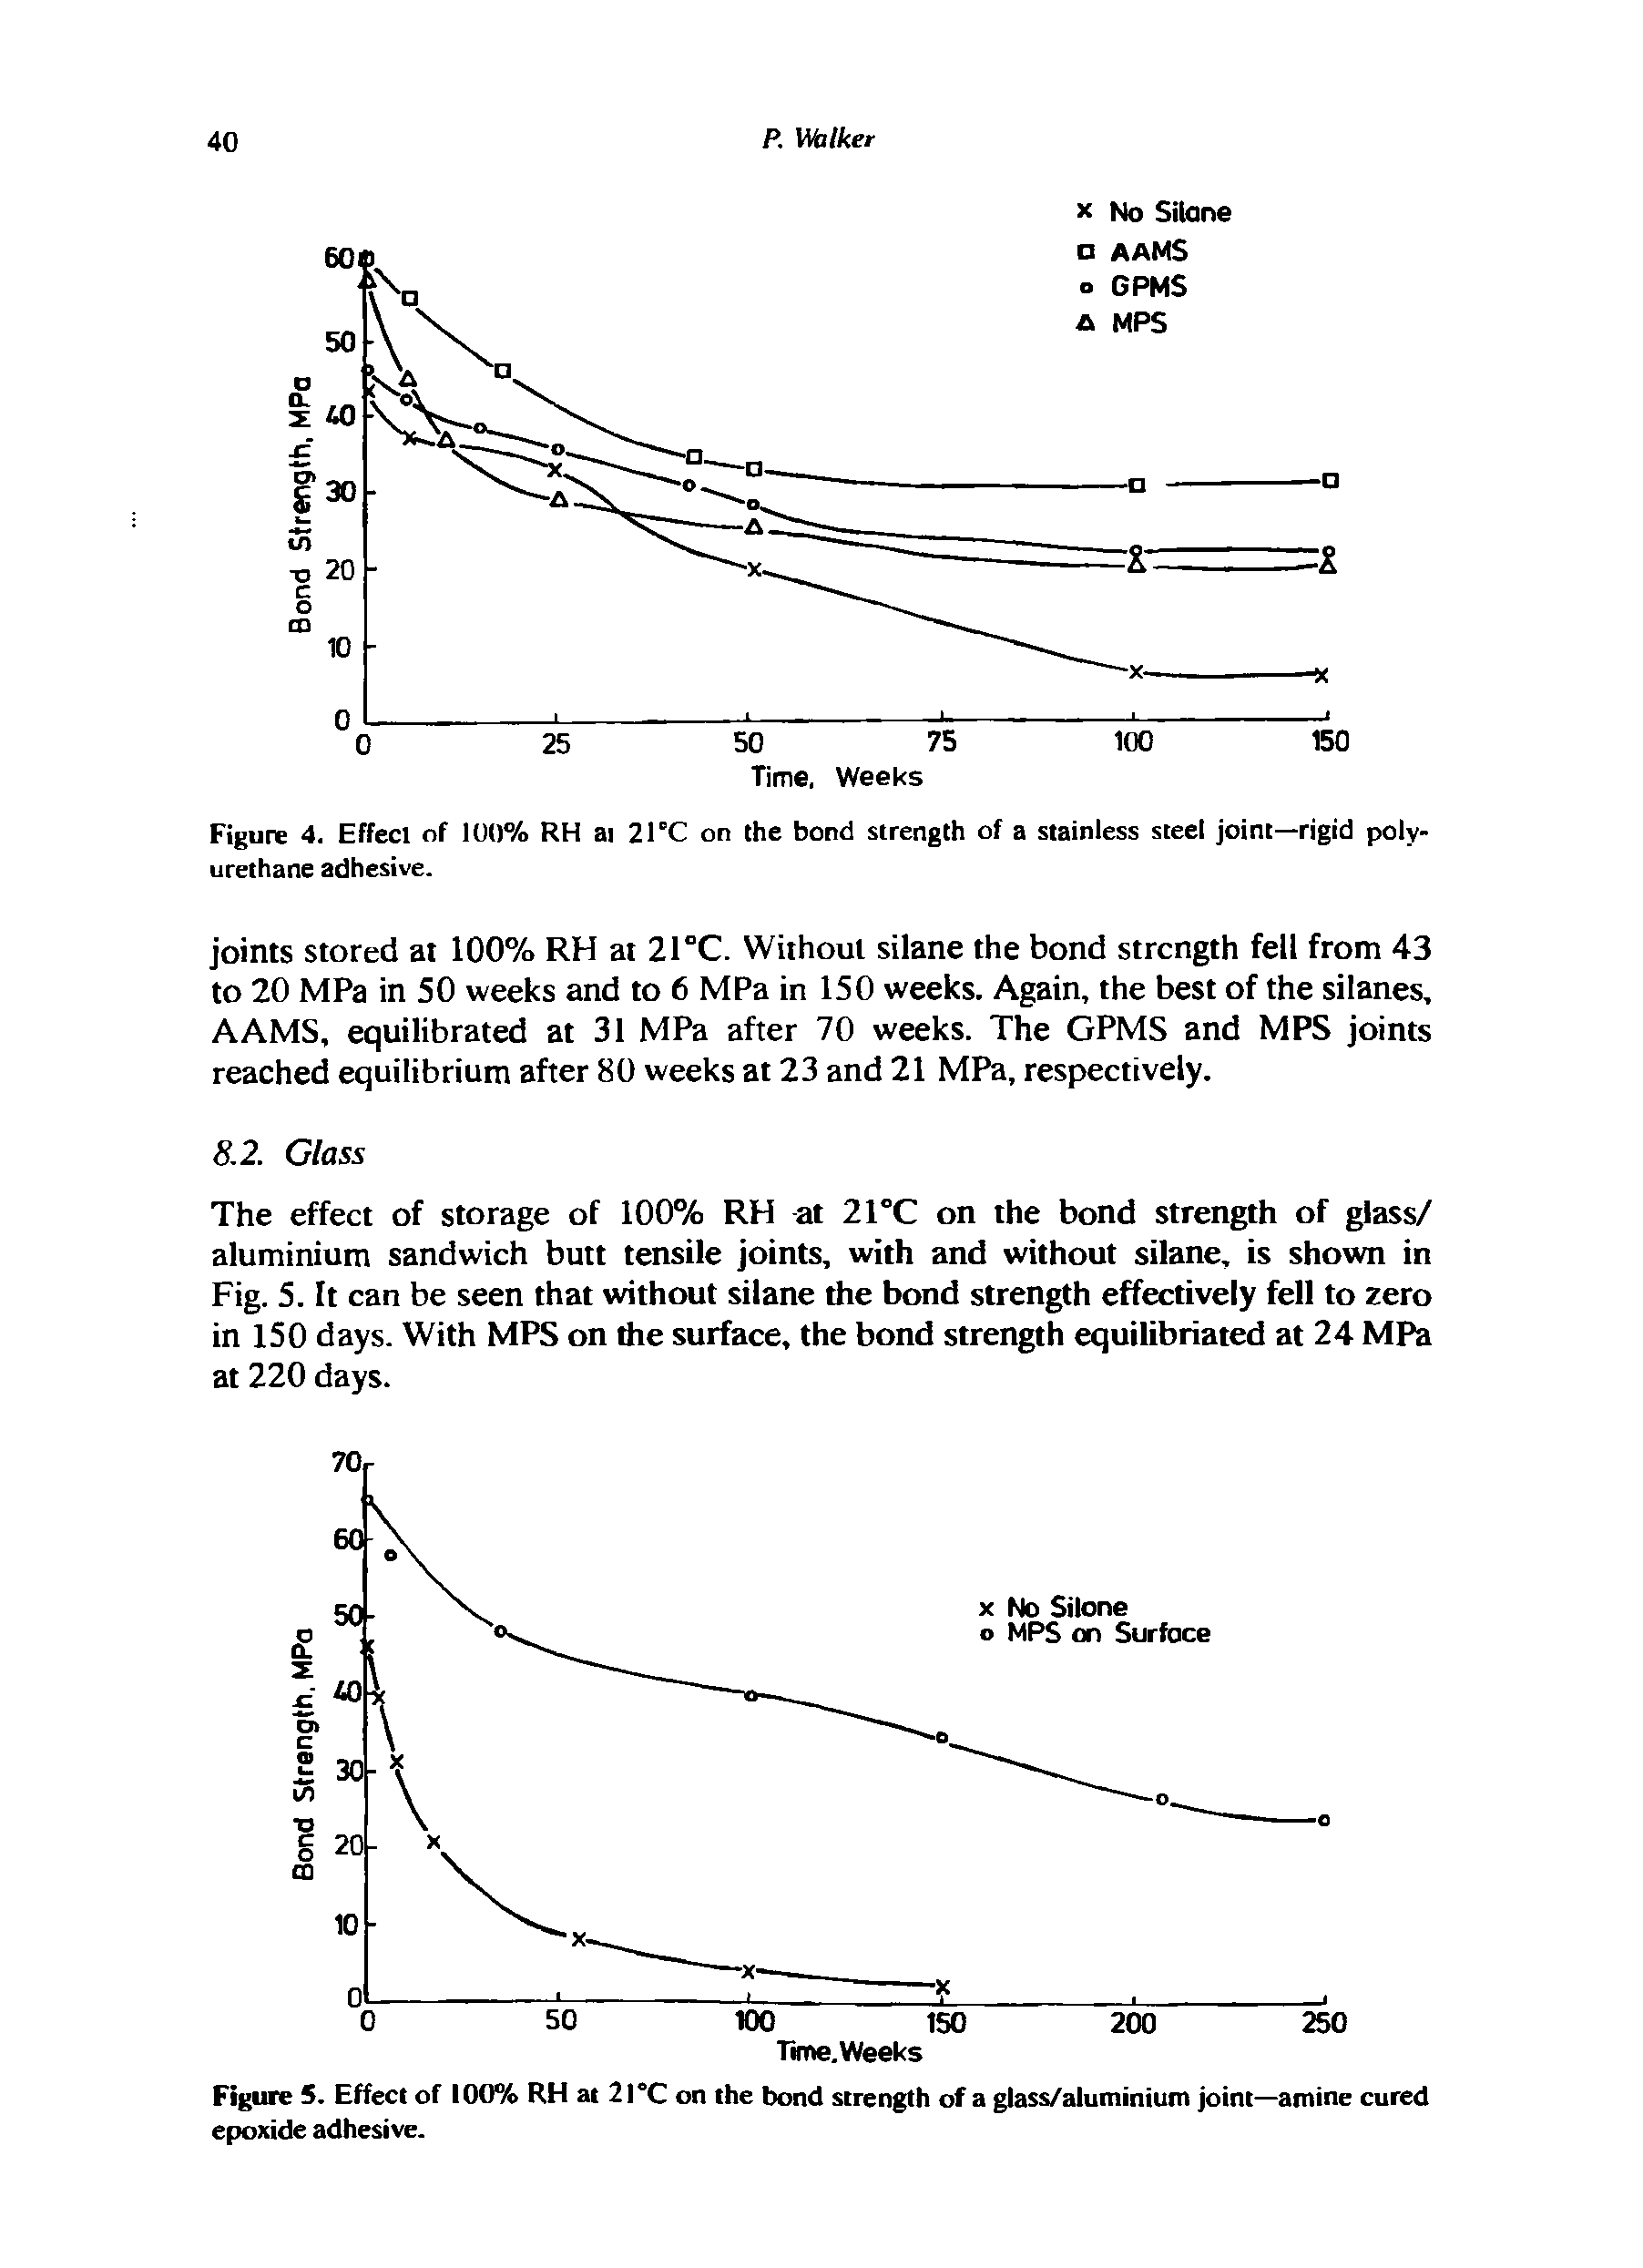 Figure 5. Effect of 100% RH at 2I°C on the bond strength of a glass/aluminium joint—amine cured epoxide adhesive.